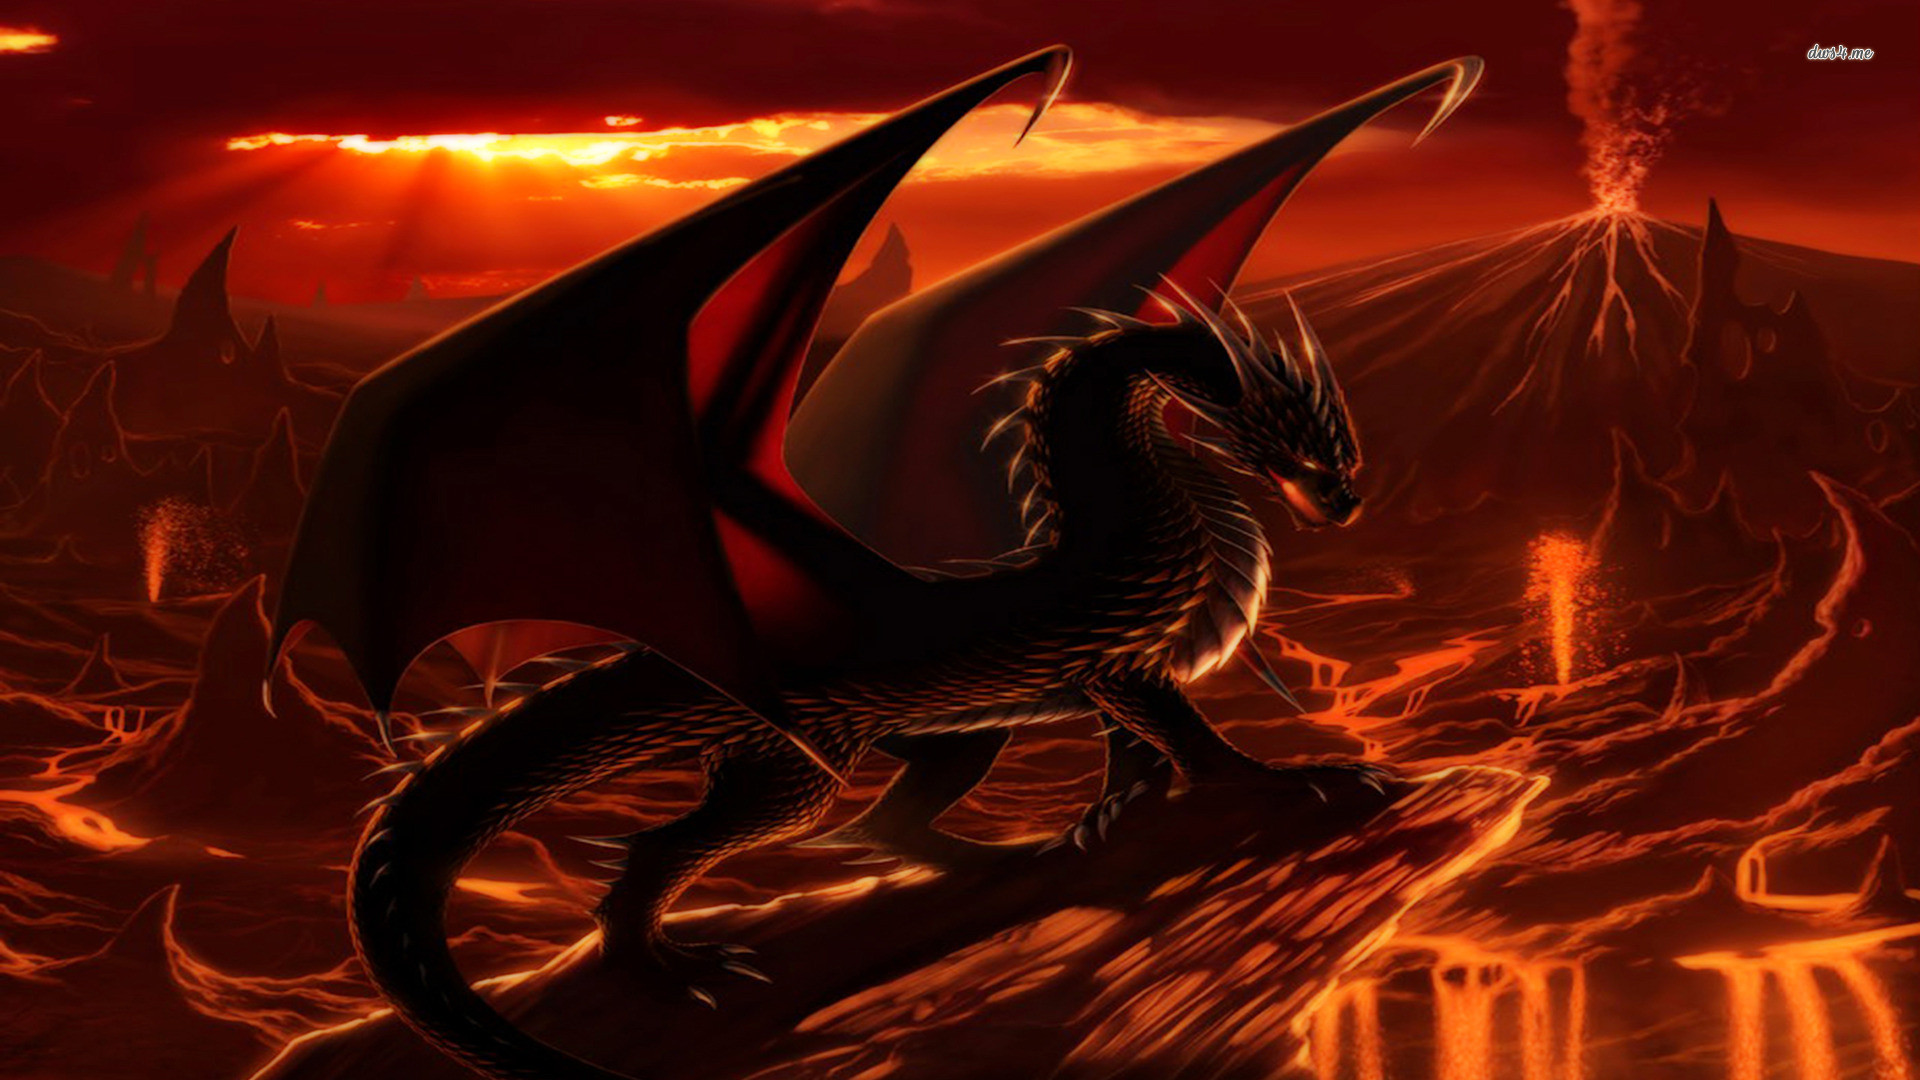 1920x1080 Dragon surrounded by lava wallpaper